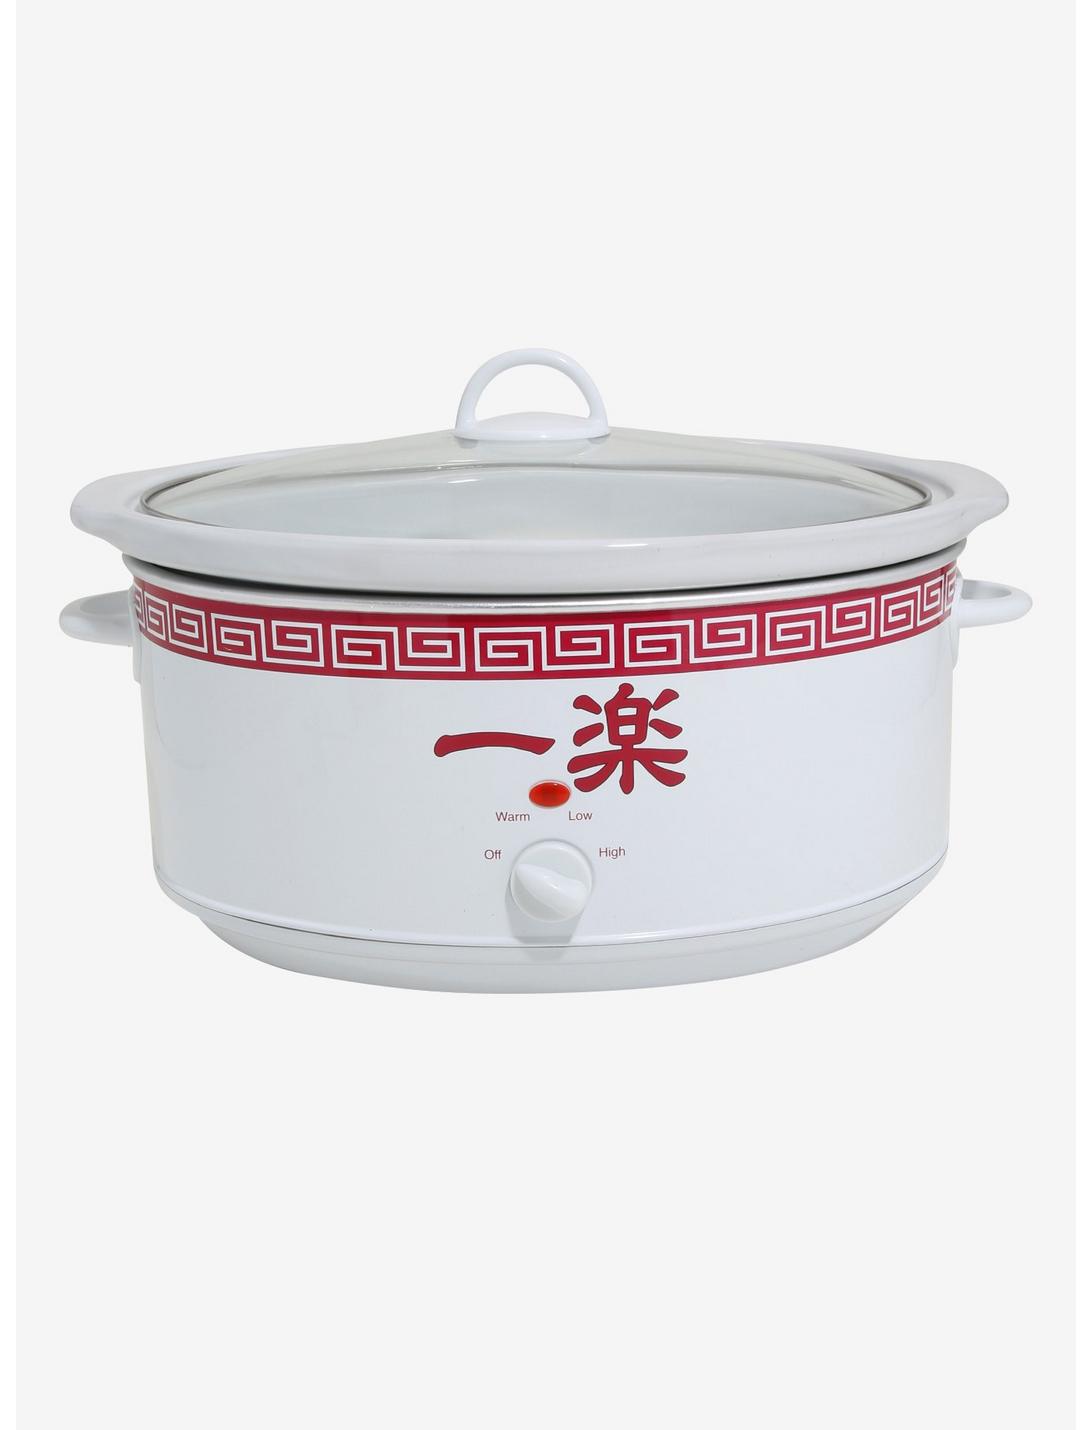 Naruto Shippuden 7-Quart Slow Cooker - BoxLunch Exclusive, , hi-res